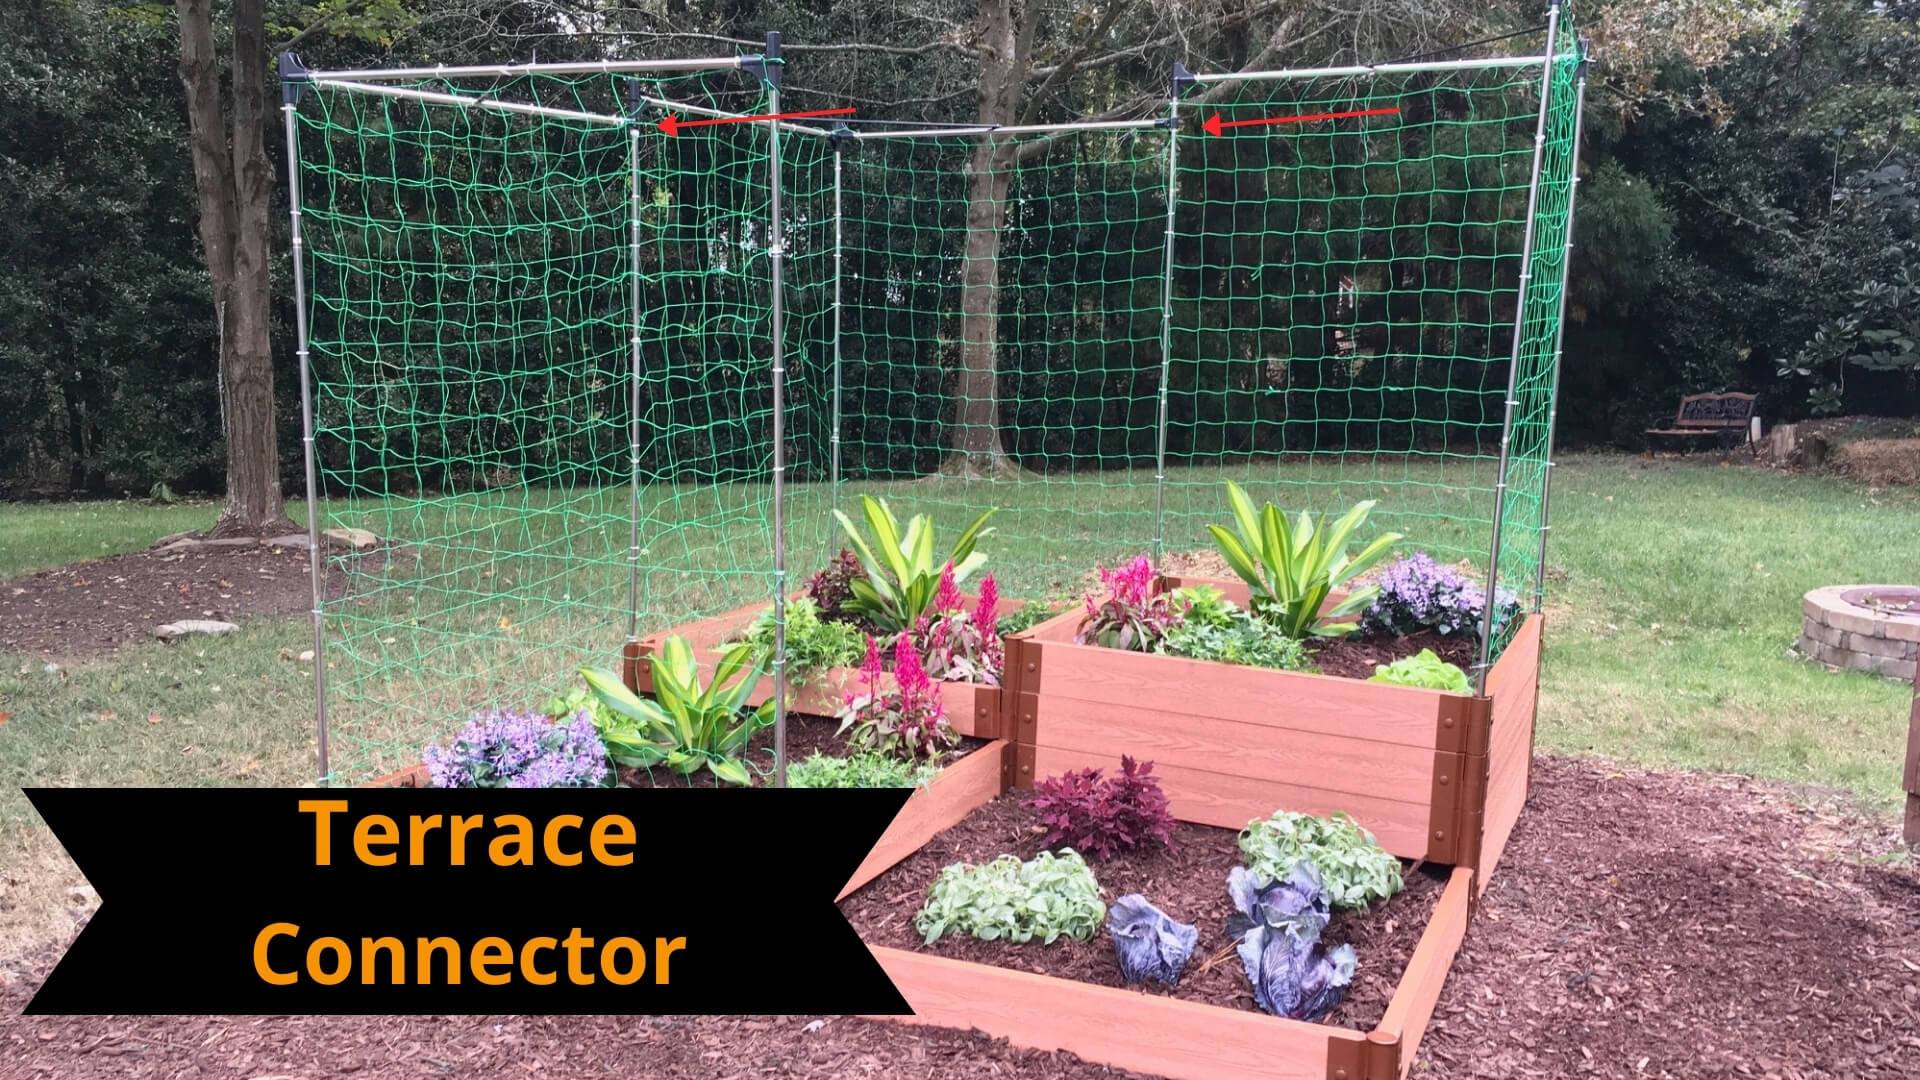 Terrace Connector: Connects Veggie Wall/Animal Barrier for Terraced Gardens - 2 Pack Accessories Frame It All 